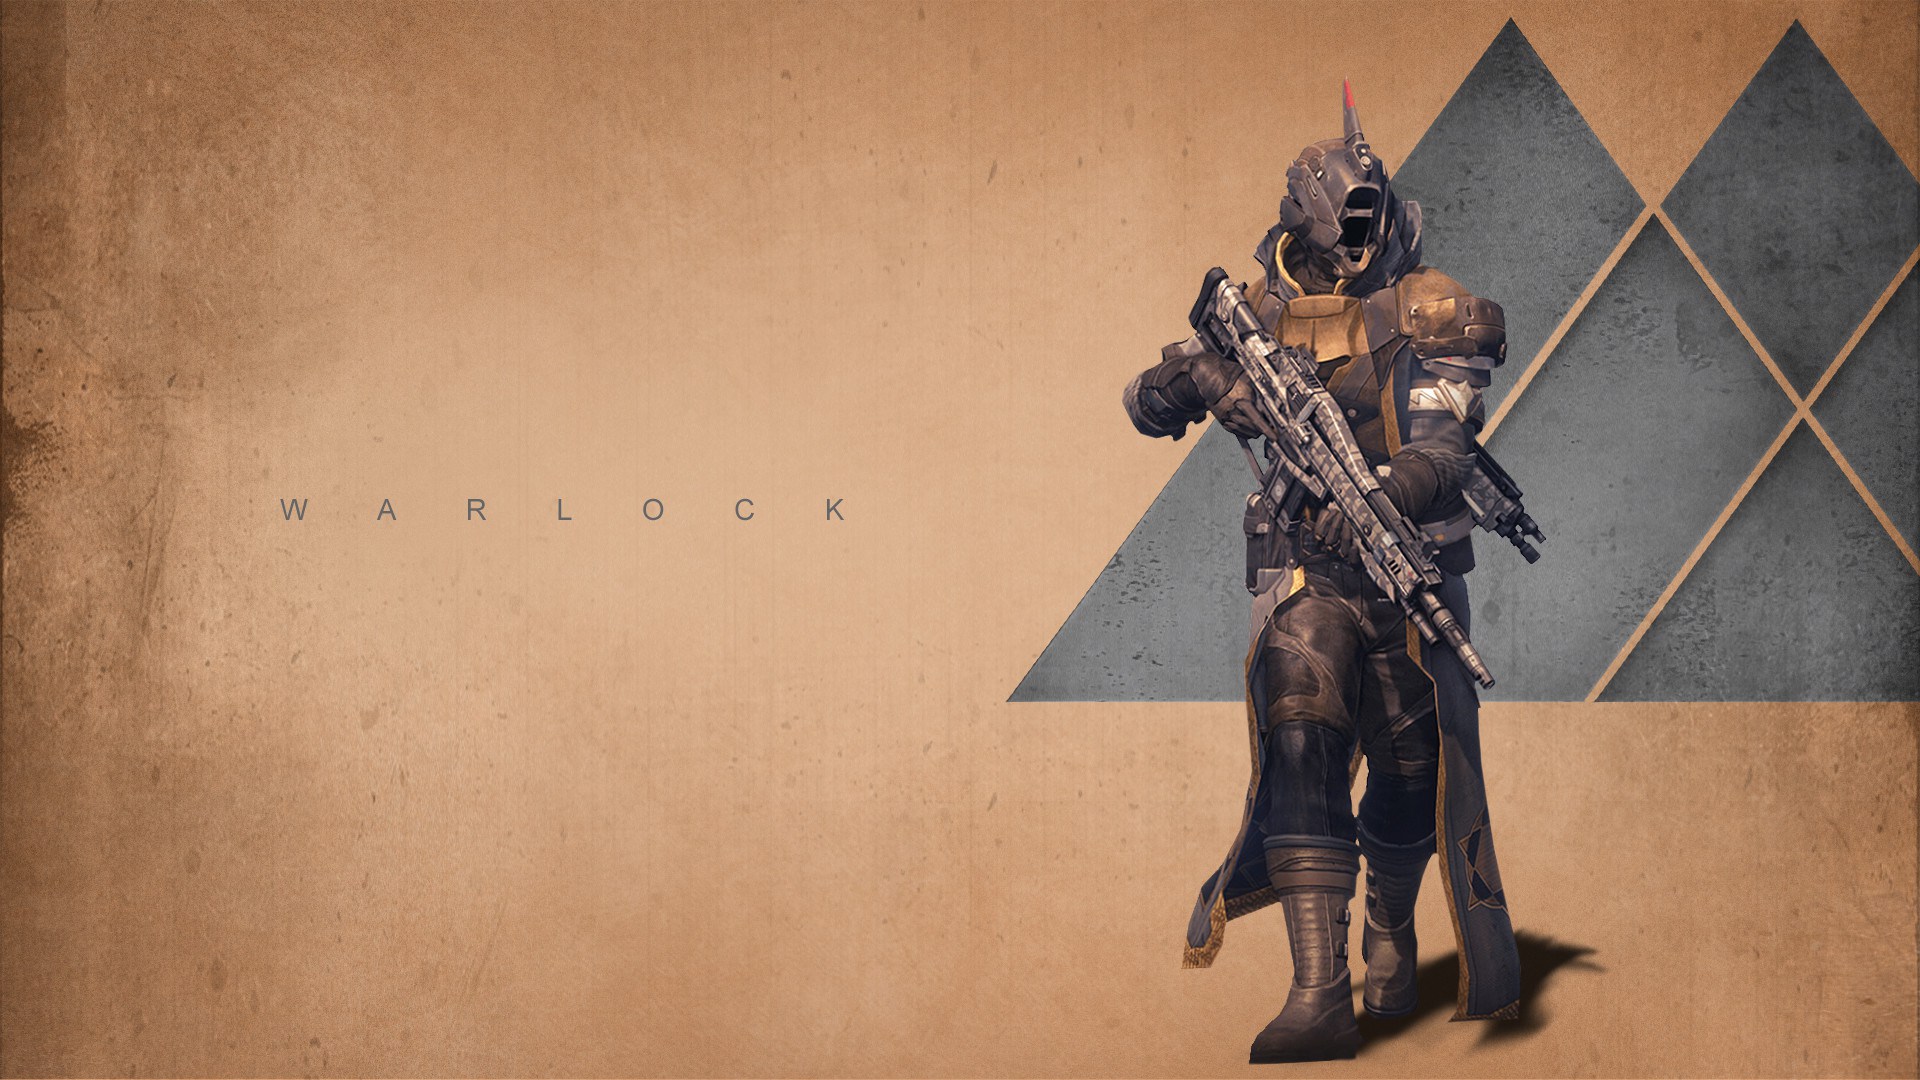 Also You Can Check Out A Ton More Destiny Wallpaper Here